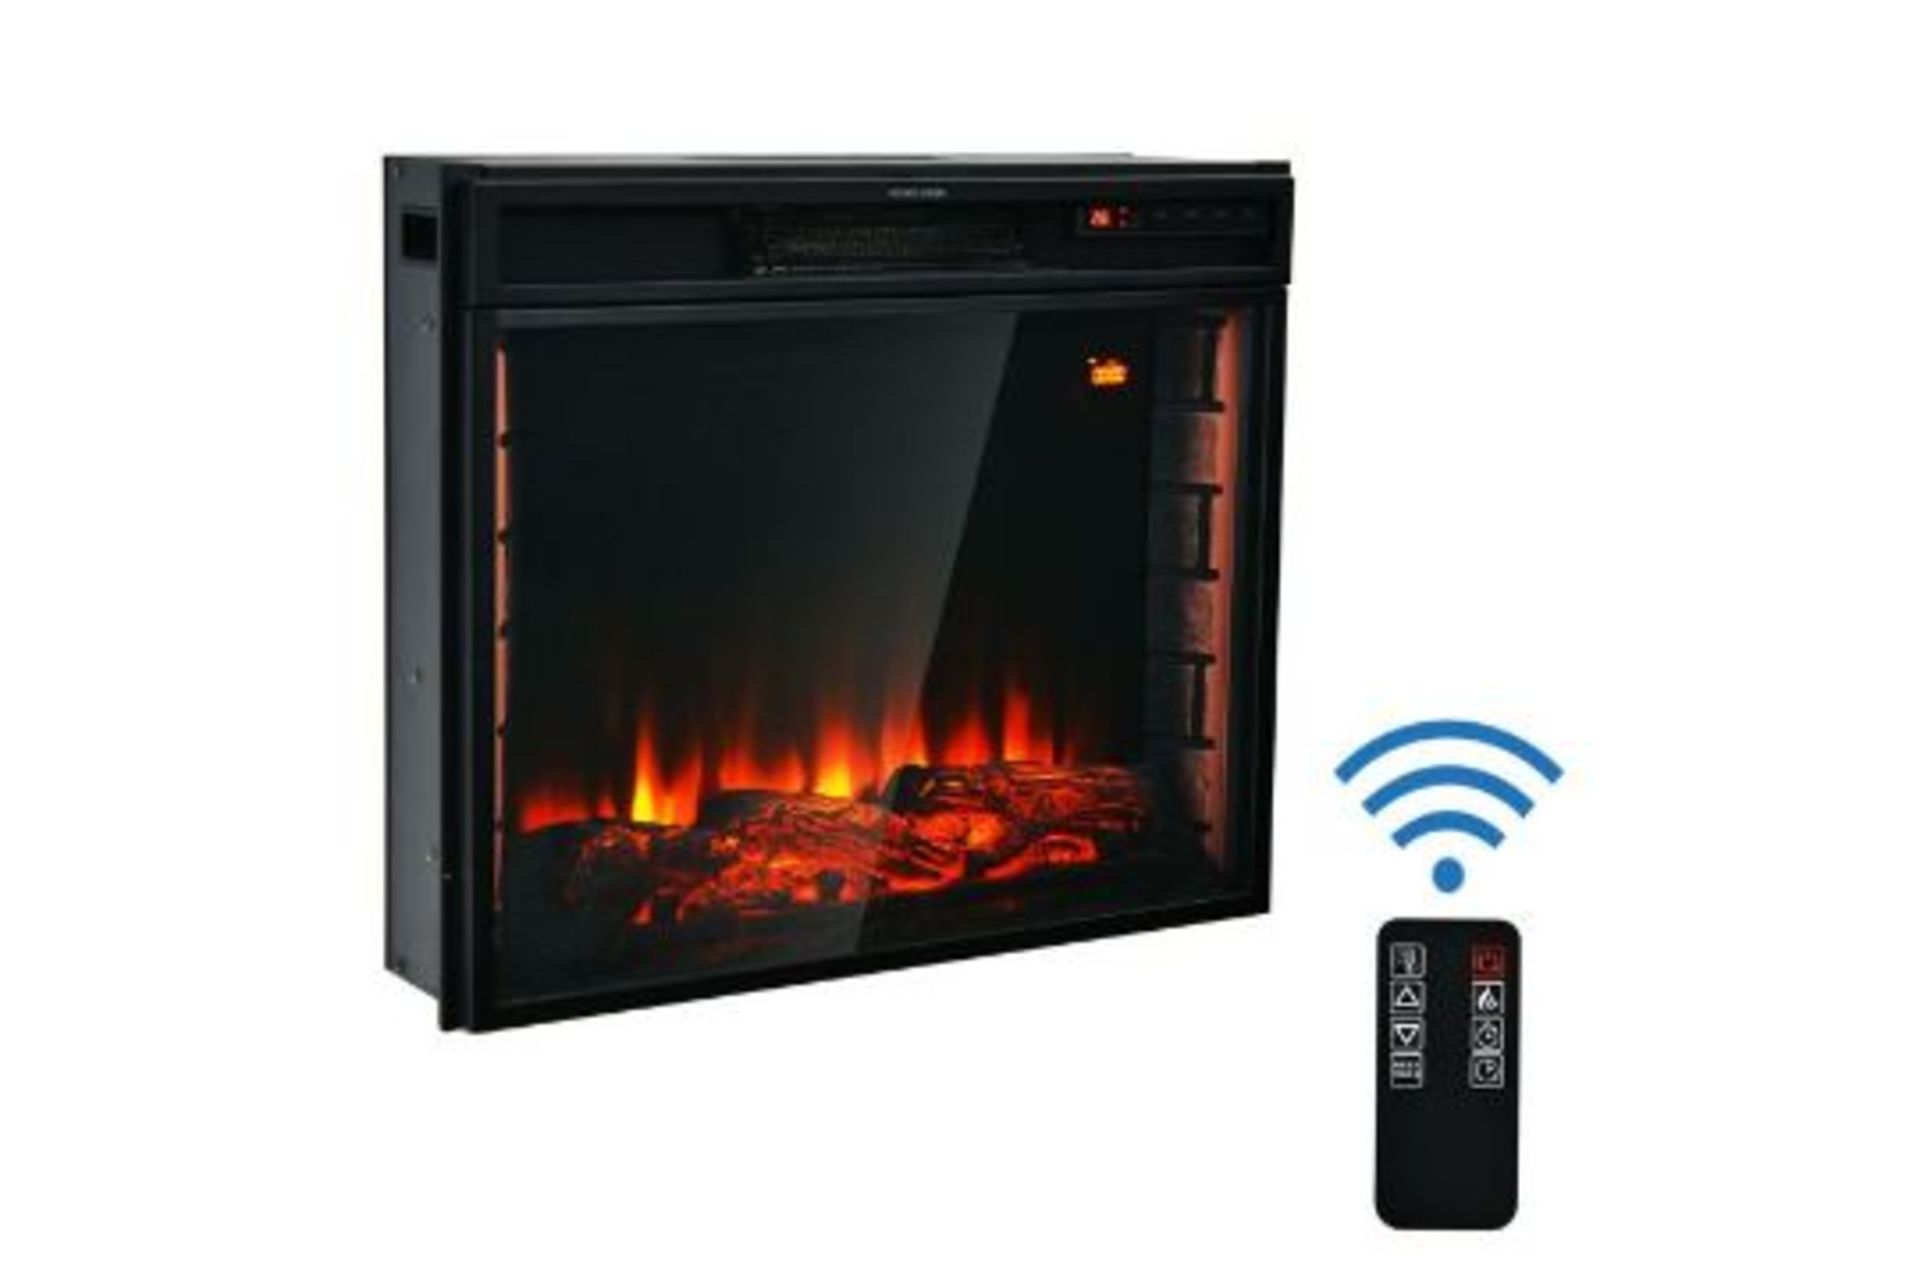 PALLET TO CONTAIN 16 x New & Boxed Marsily Marlow Home Co. 60cm Electric Fireplace. RRP £299 each, - Image 5 of 7